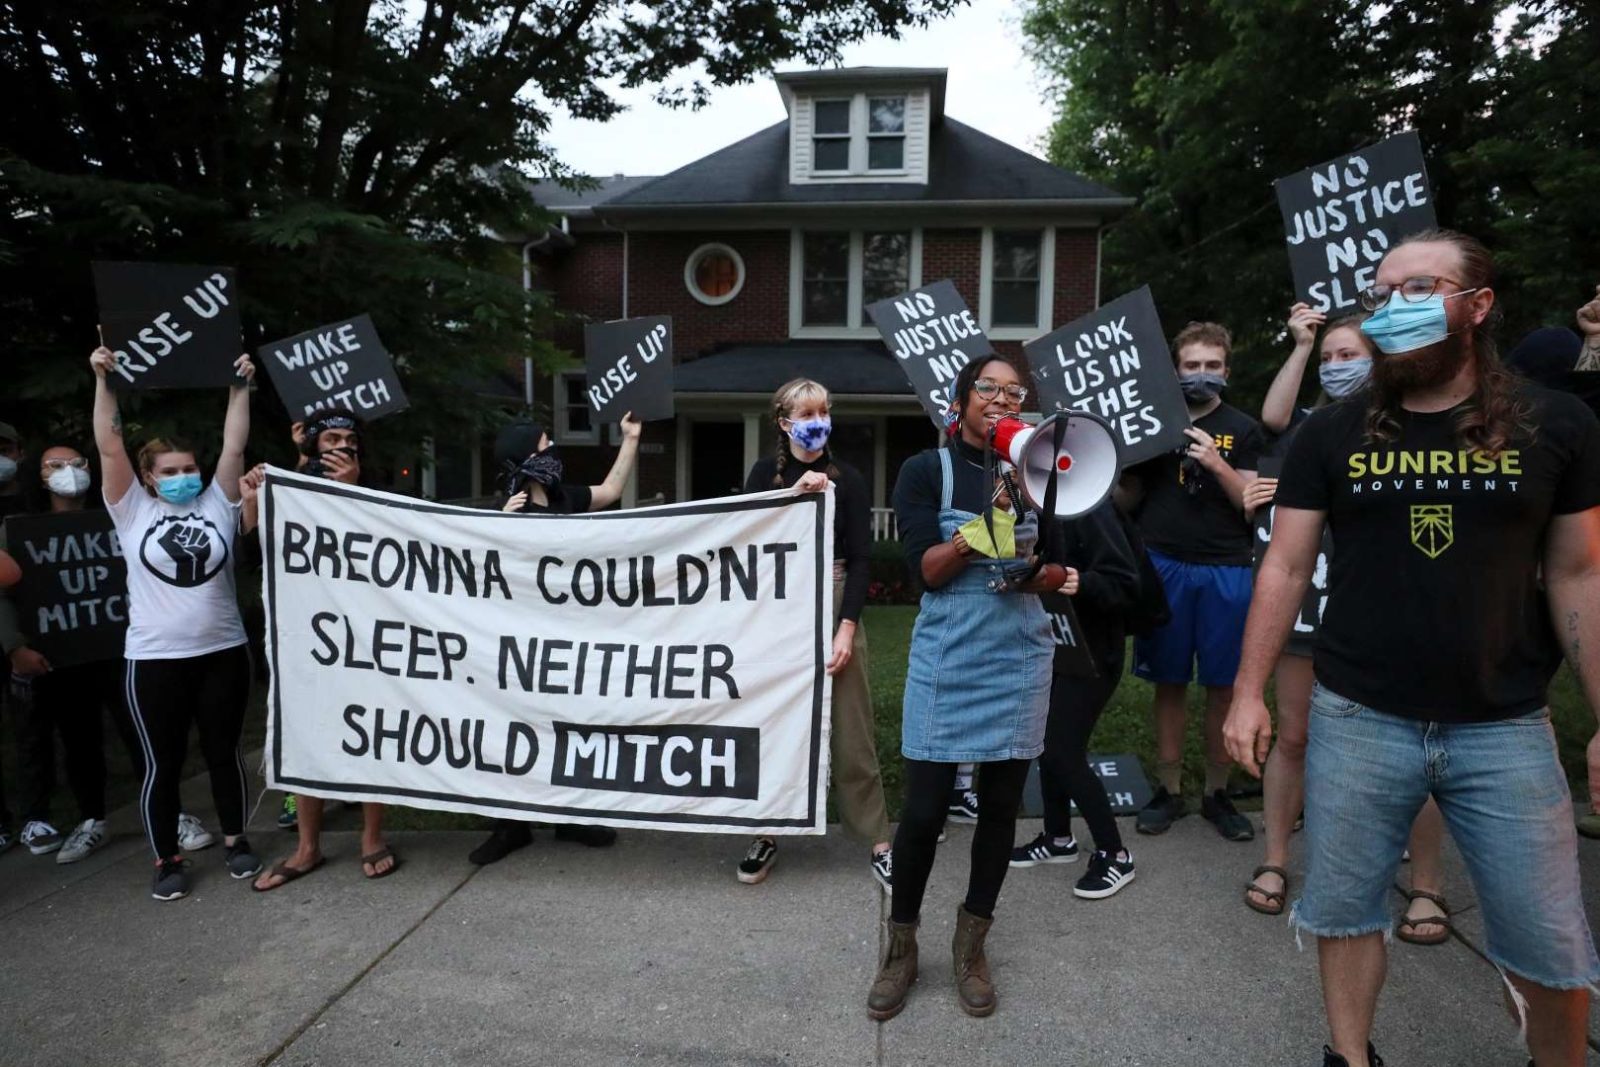 A Sunrise activist speaks into a megaphone while fellow protesters stand in front of Mitch McConnell's KY house holding a large sign saying "Breonna Couldn't Sleep. Neither Should Mitch".